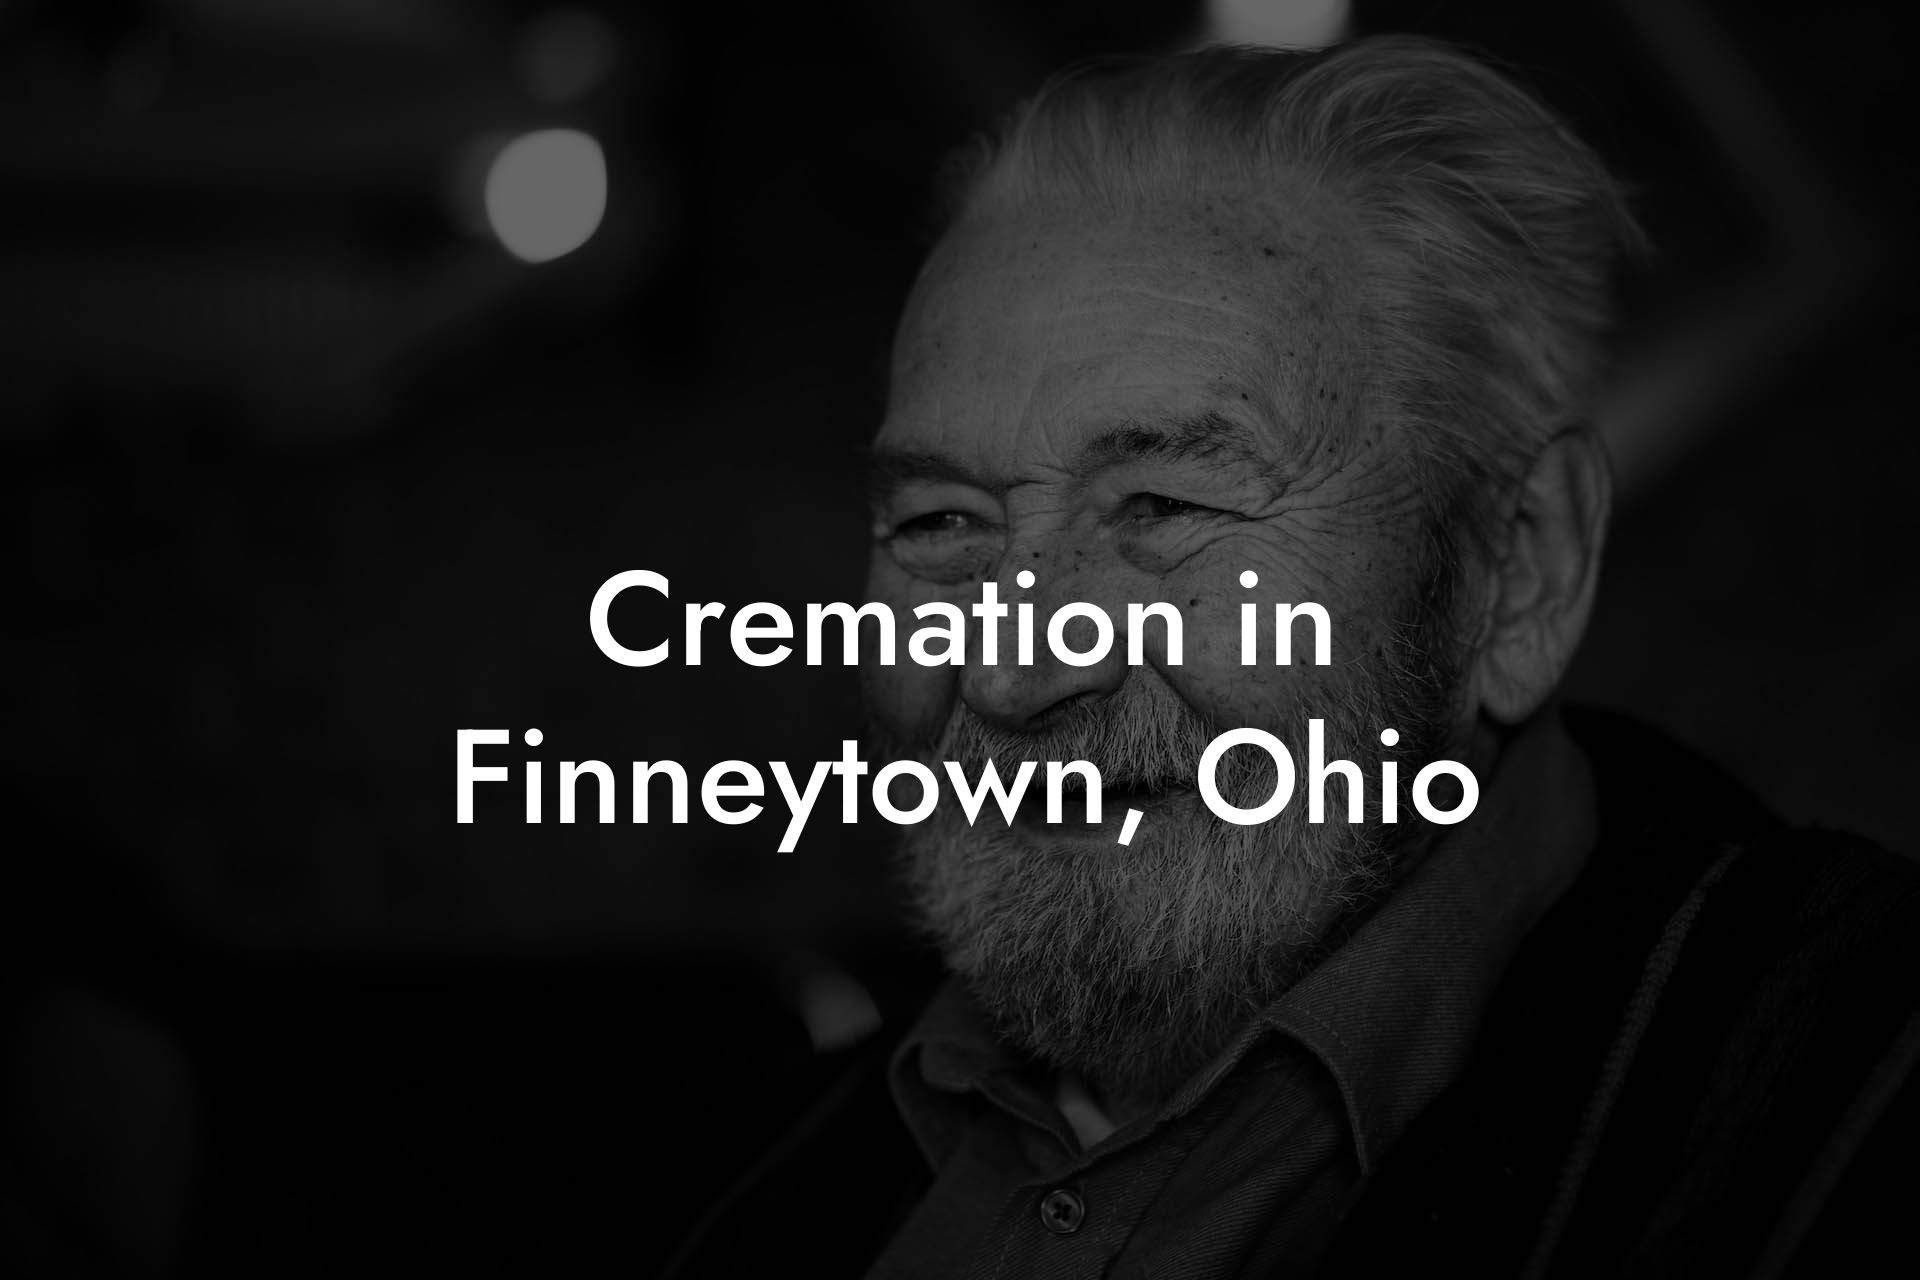 Cremation in Finneytown, Ohio